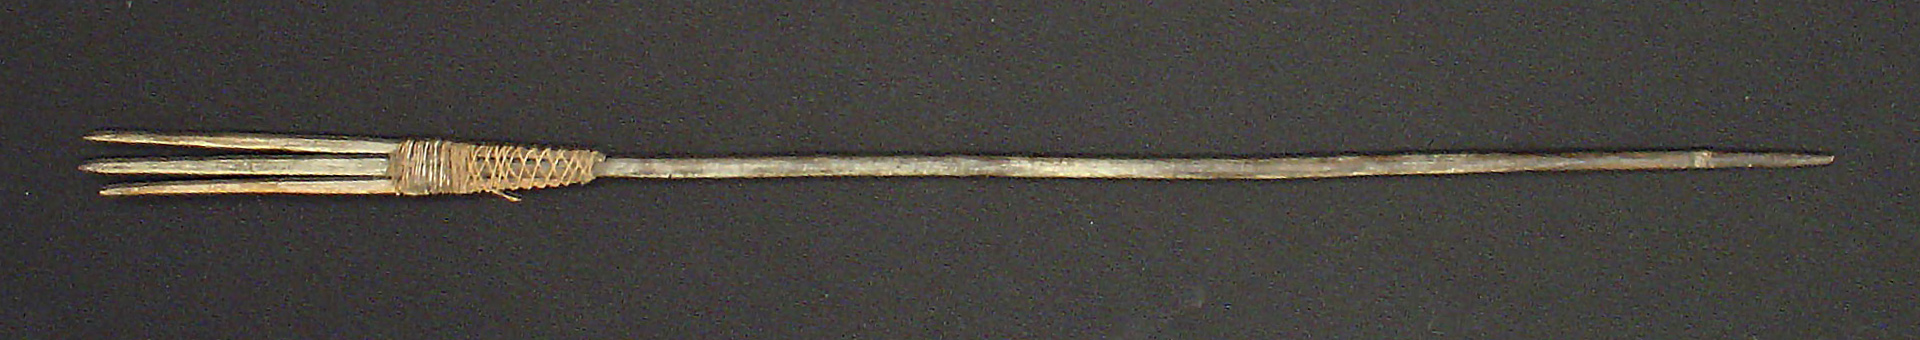 long wooden stick tied to three wooden sharp prongs